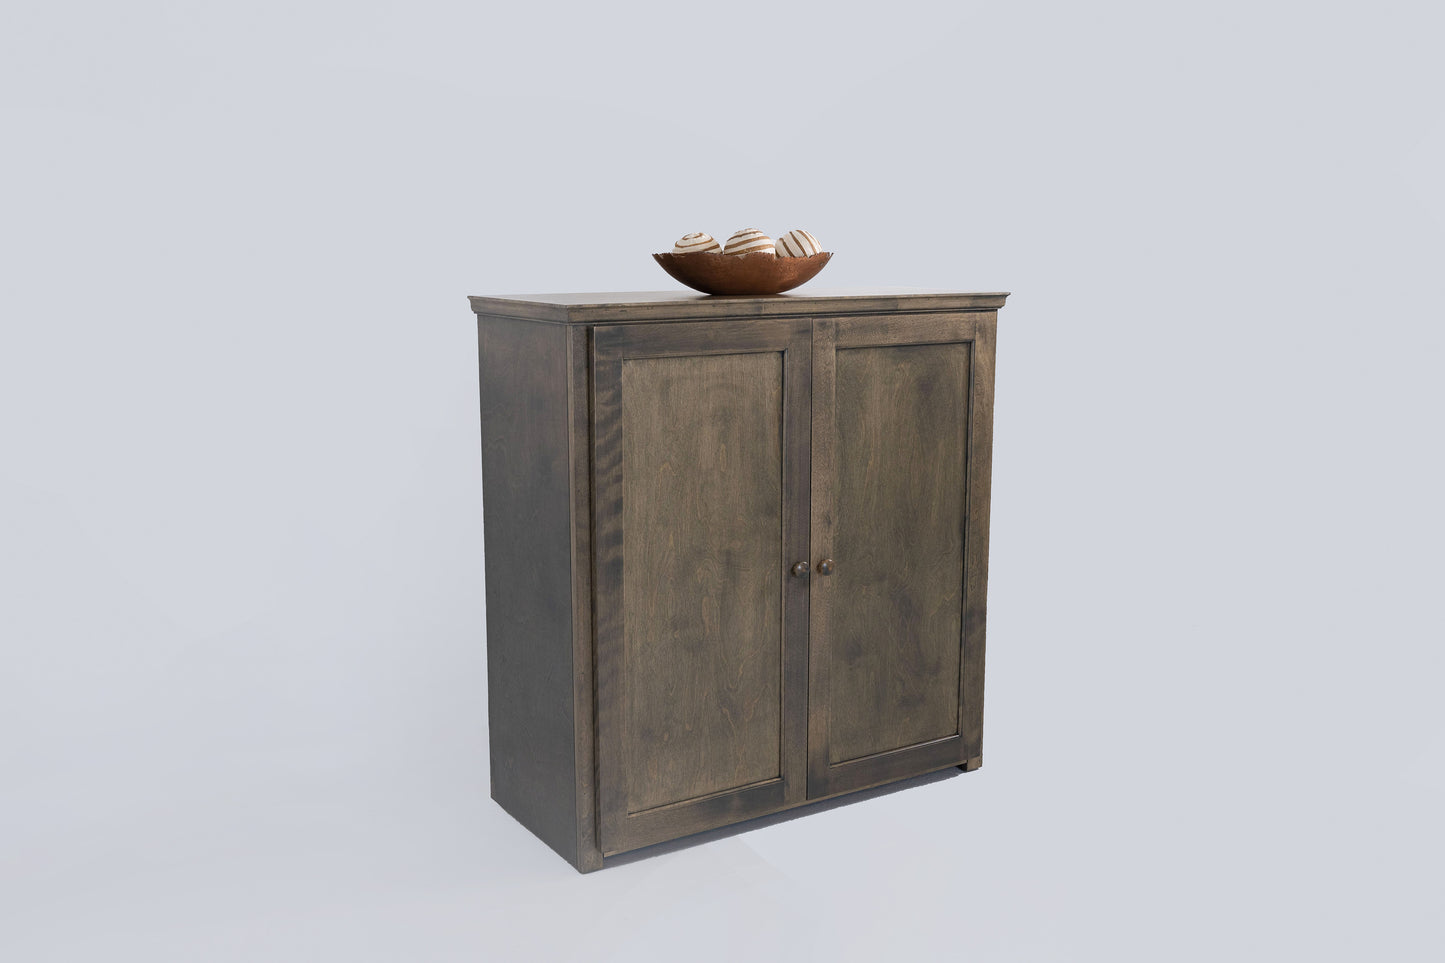 Berkshire Plymouth Cabinet is built from birch hardwood and is shown in Foggy Oak finish.